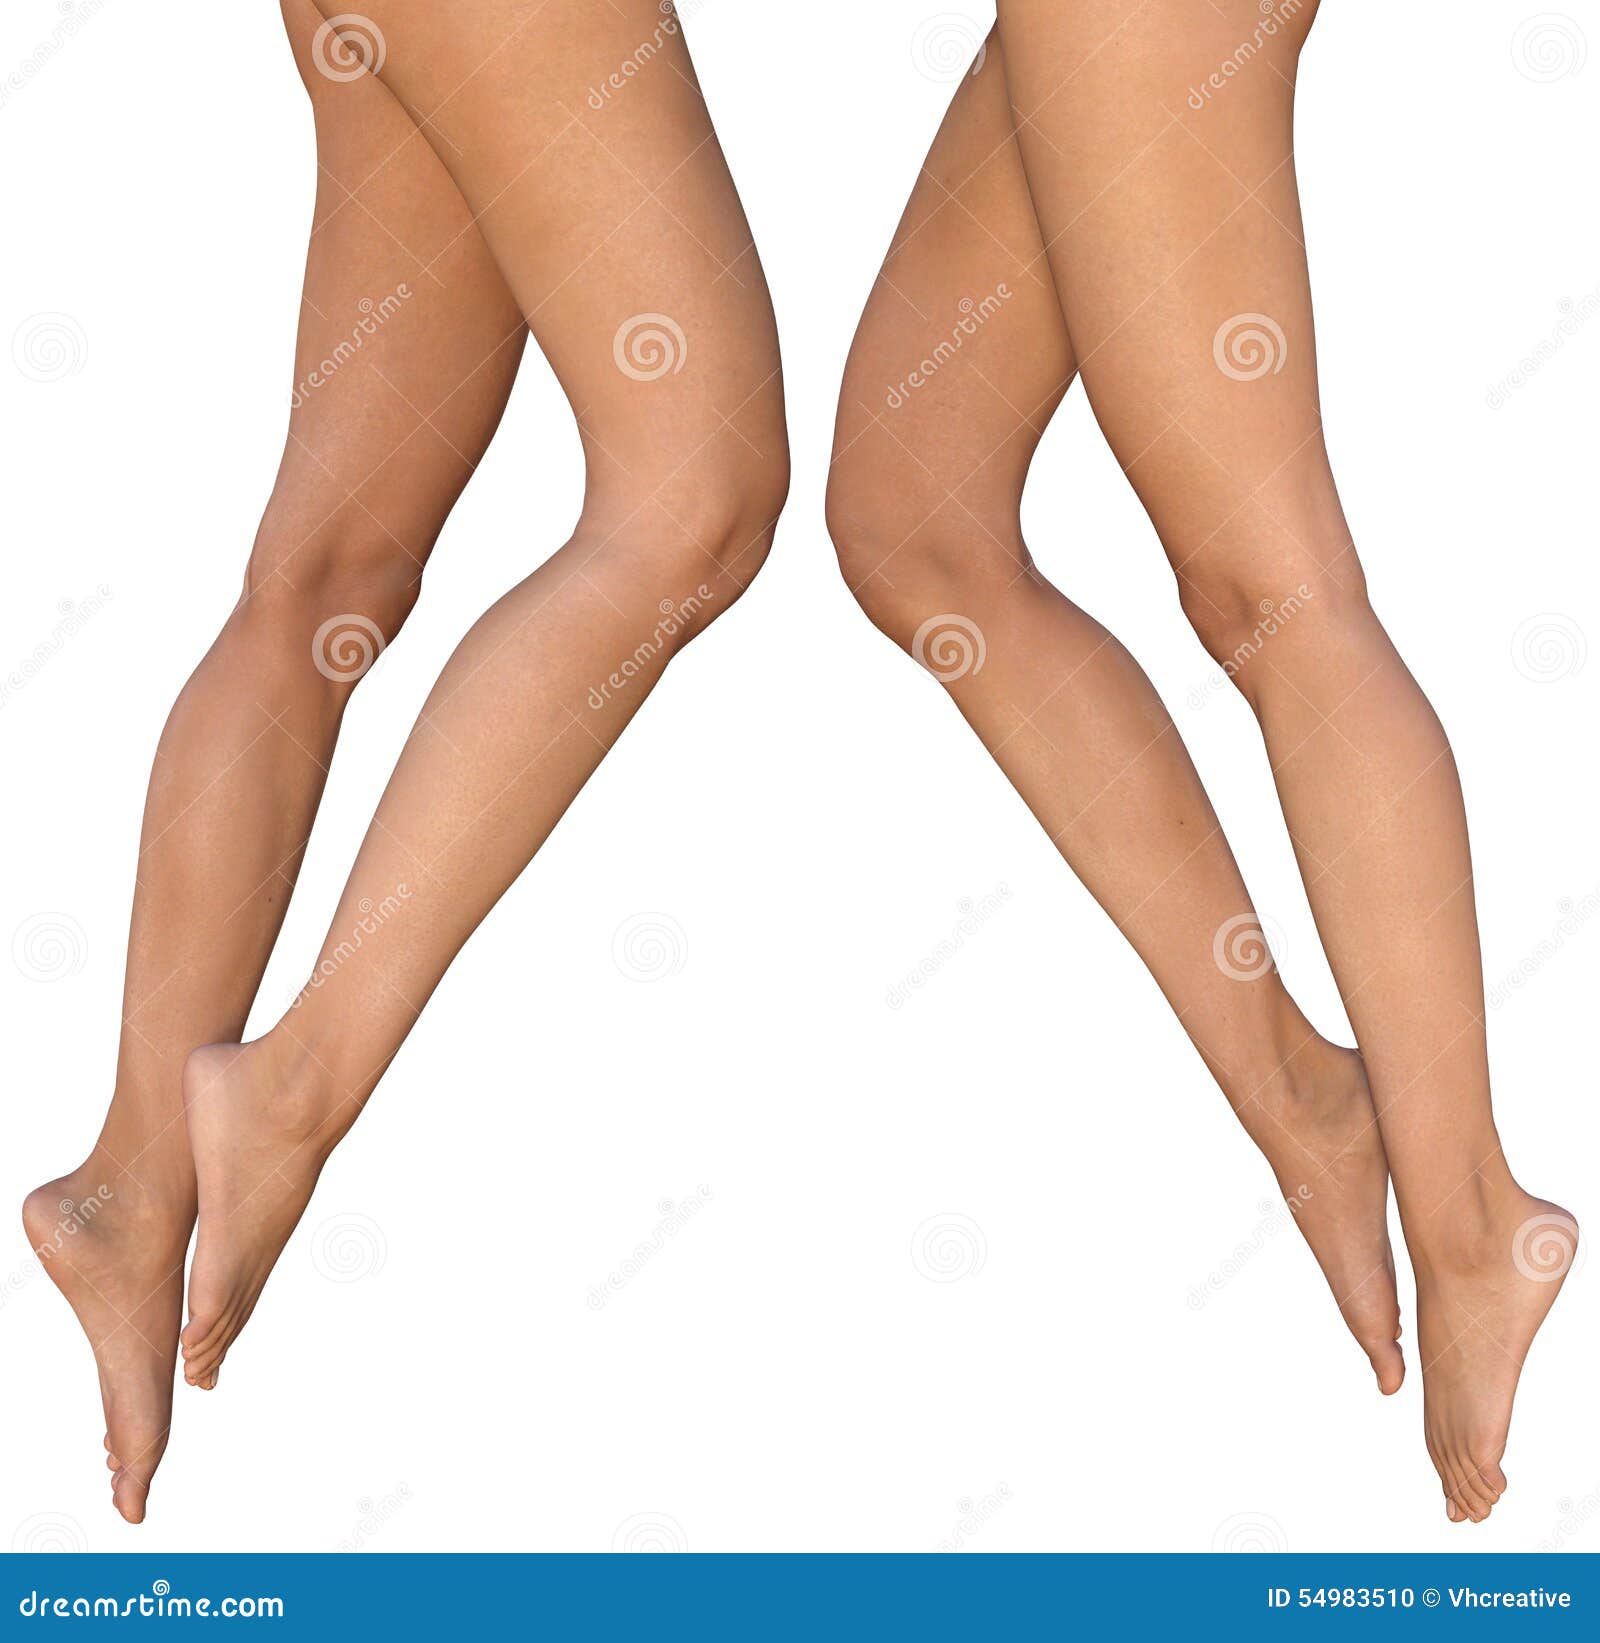 Slender Female Legs with Stretched Out Feet - Left and Right Side Views  Stock Photo - Illustration of limbs, human: 54983510